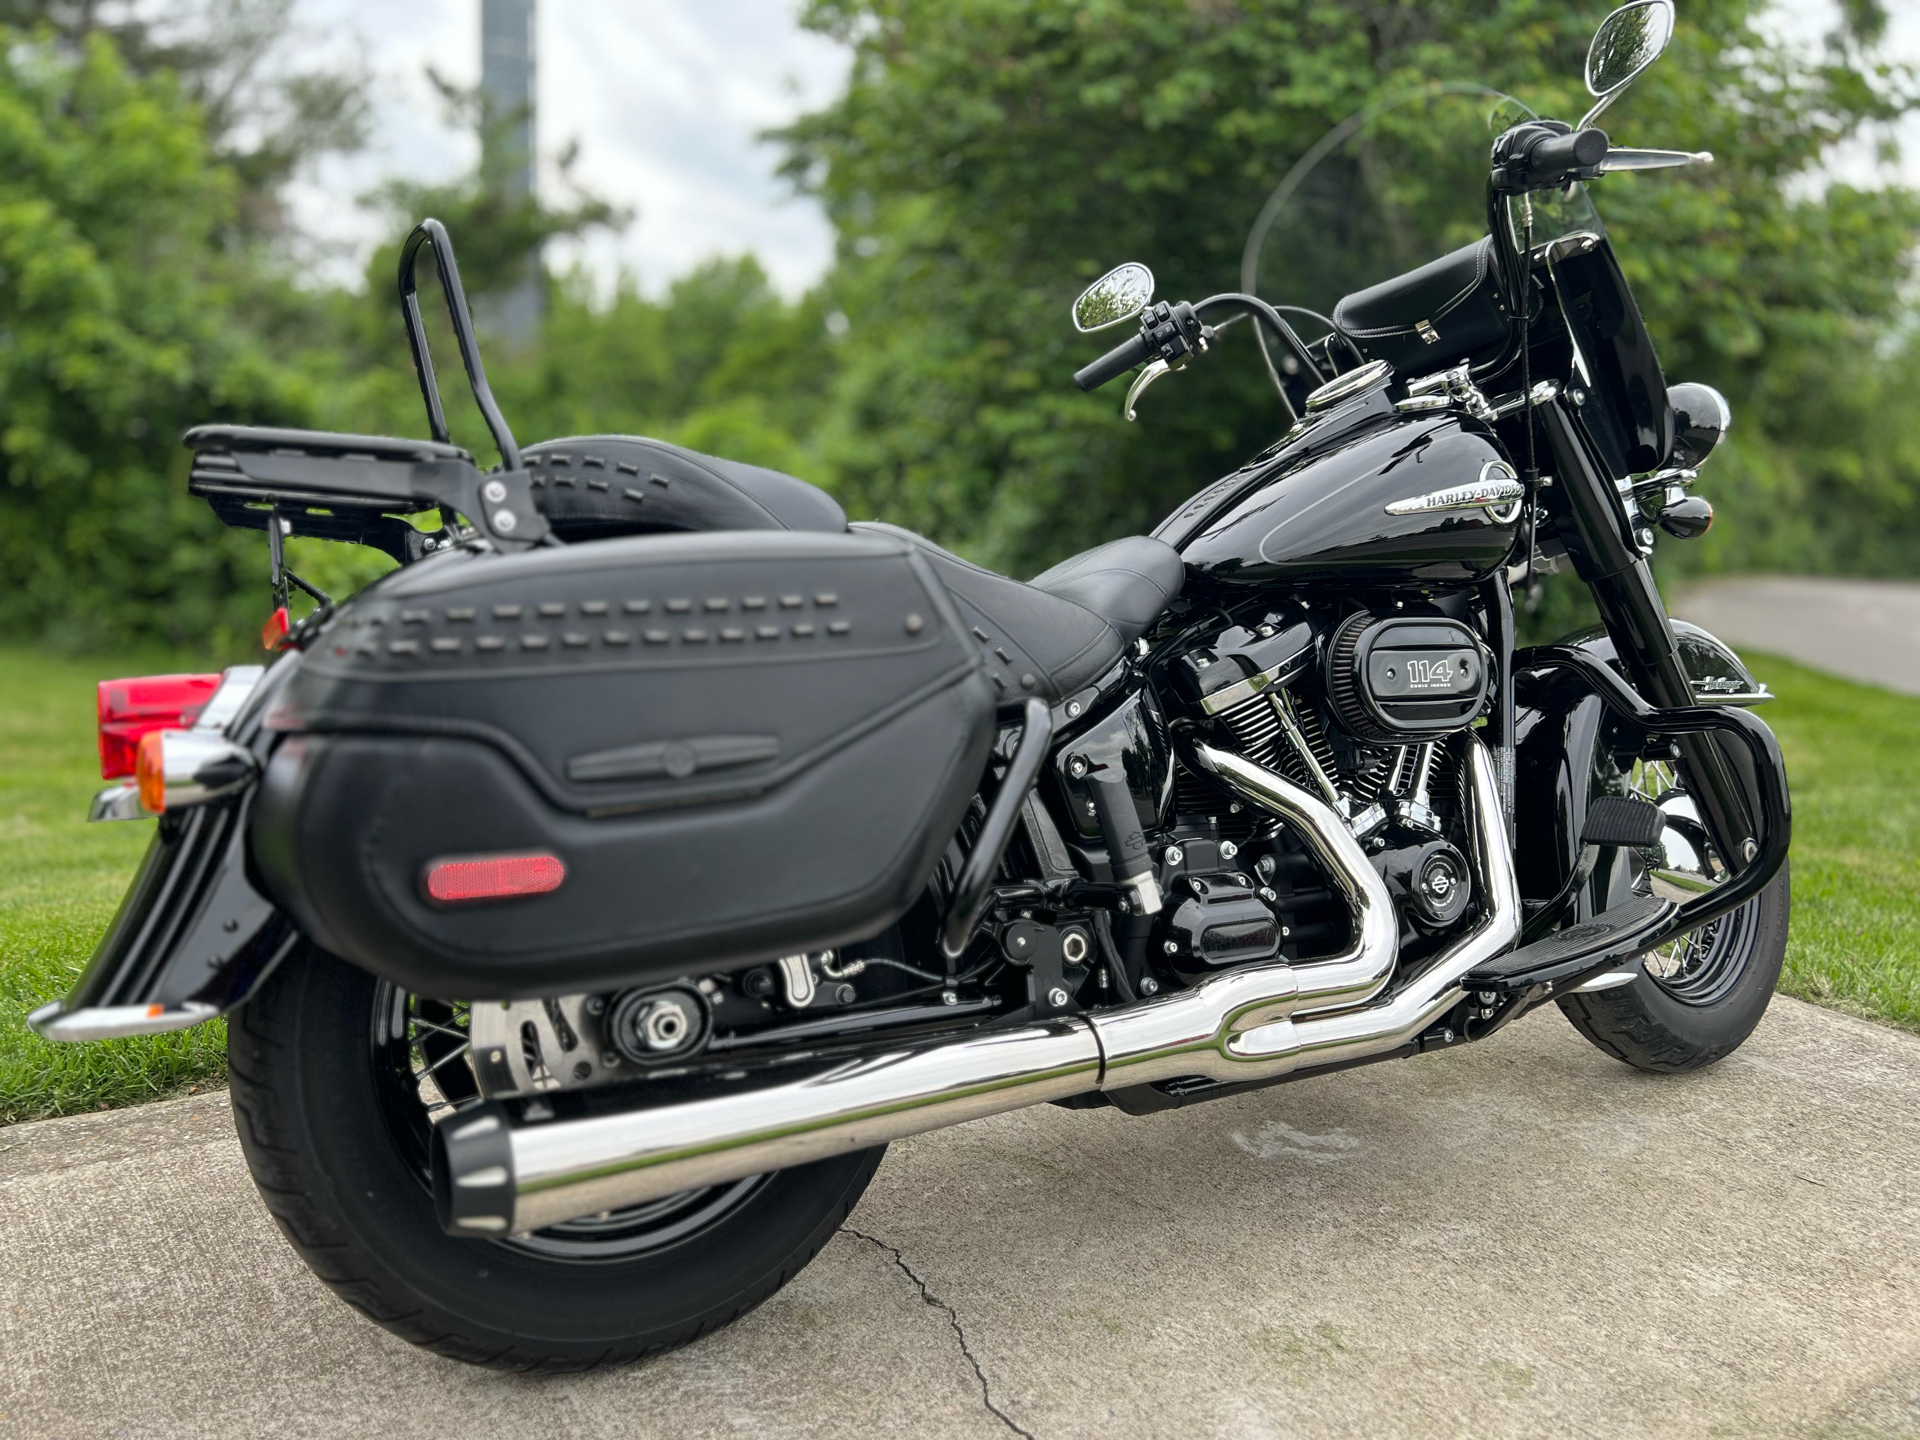 2019 Harley-Davidson Heritage Classic 114 in Franklin, Tennessee - Photo 11